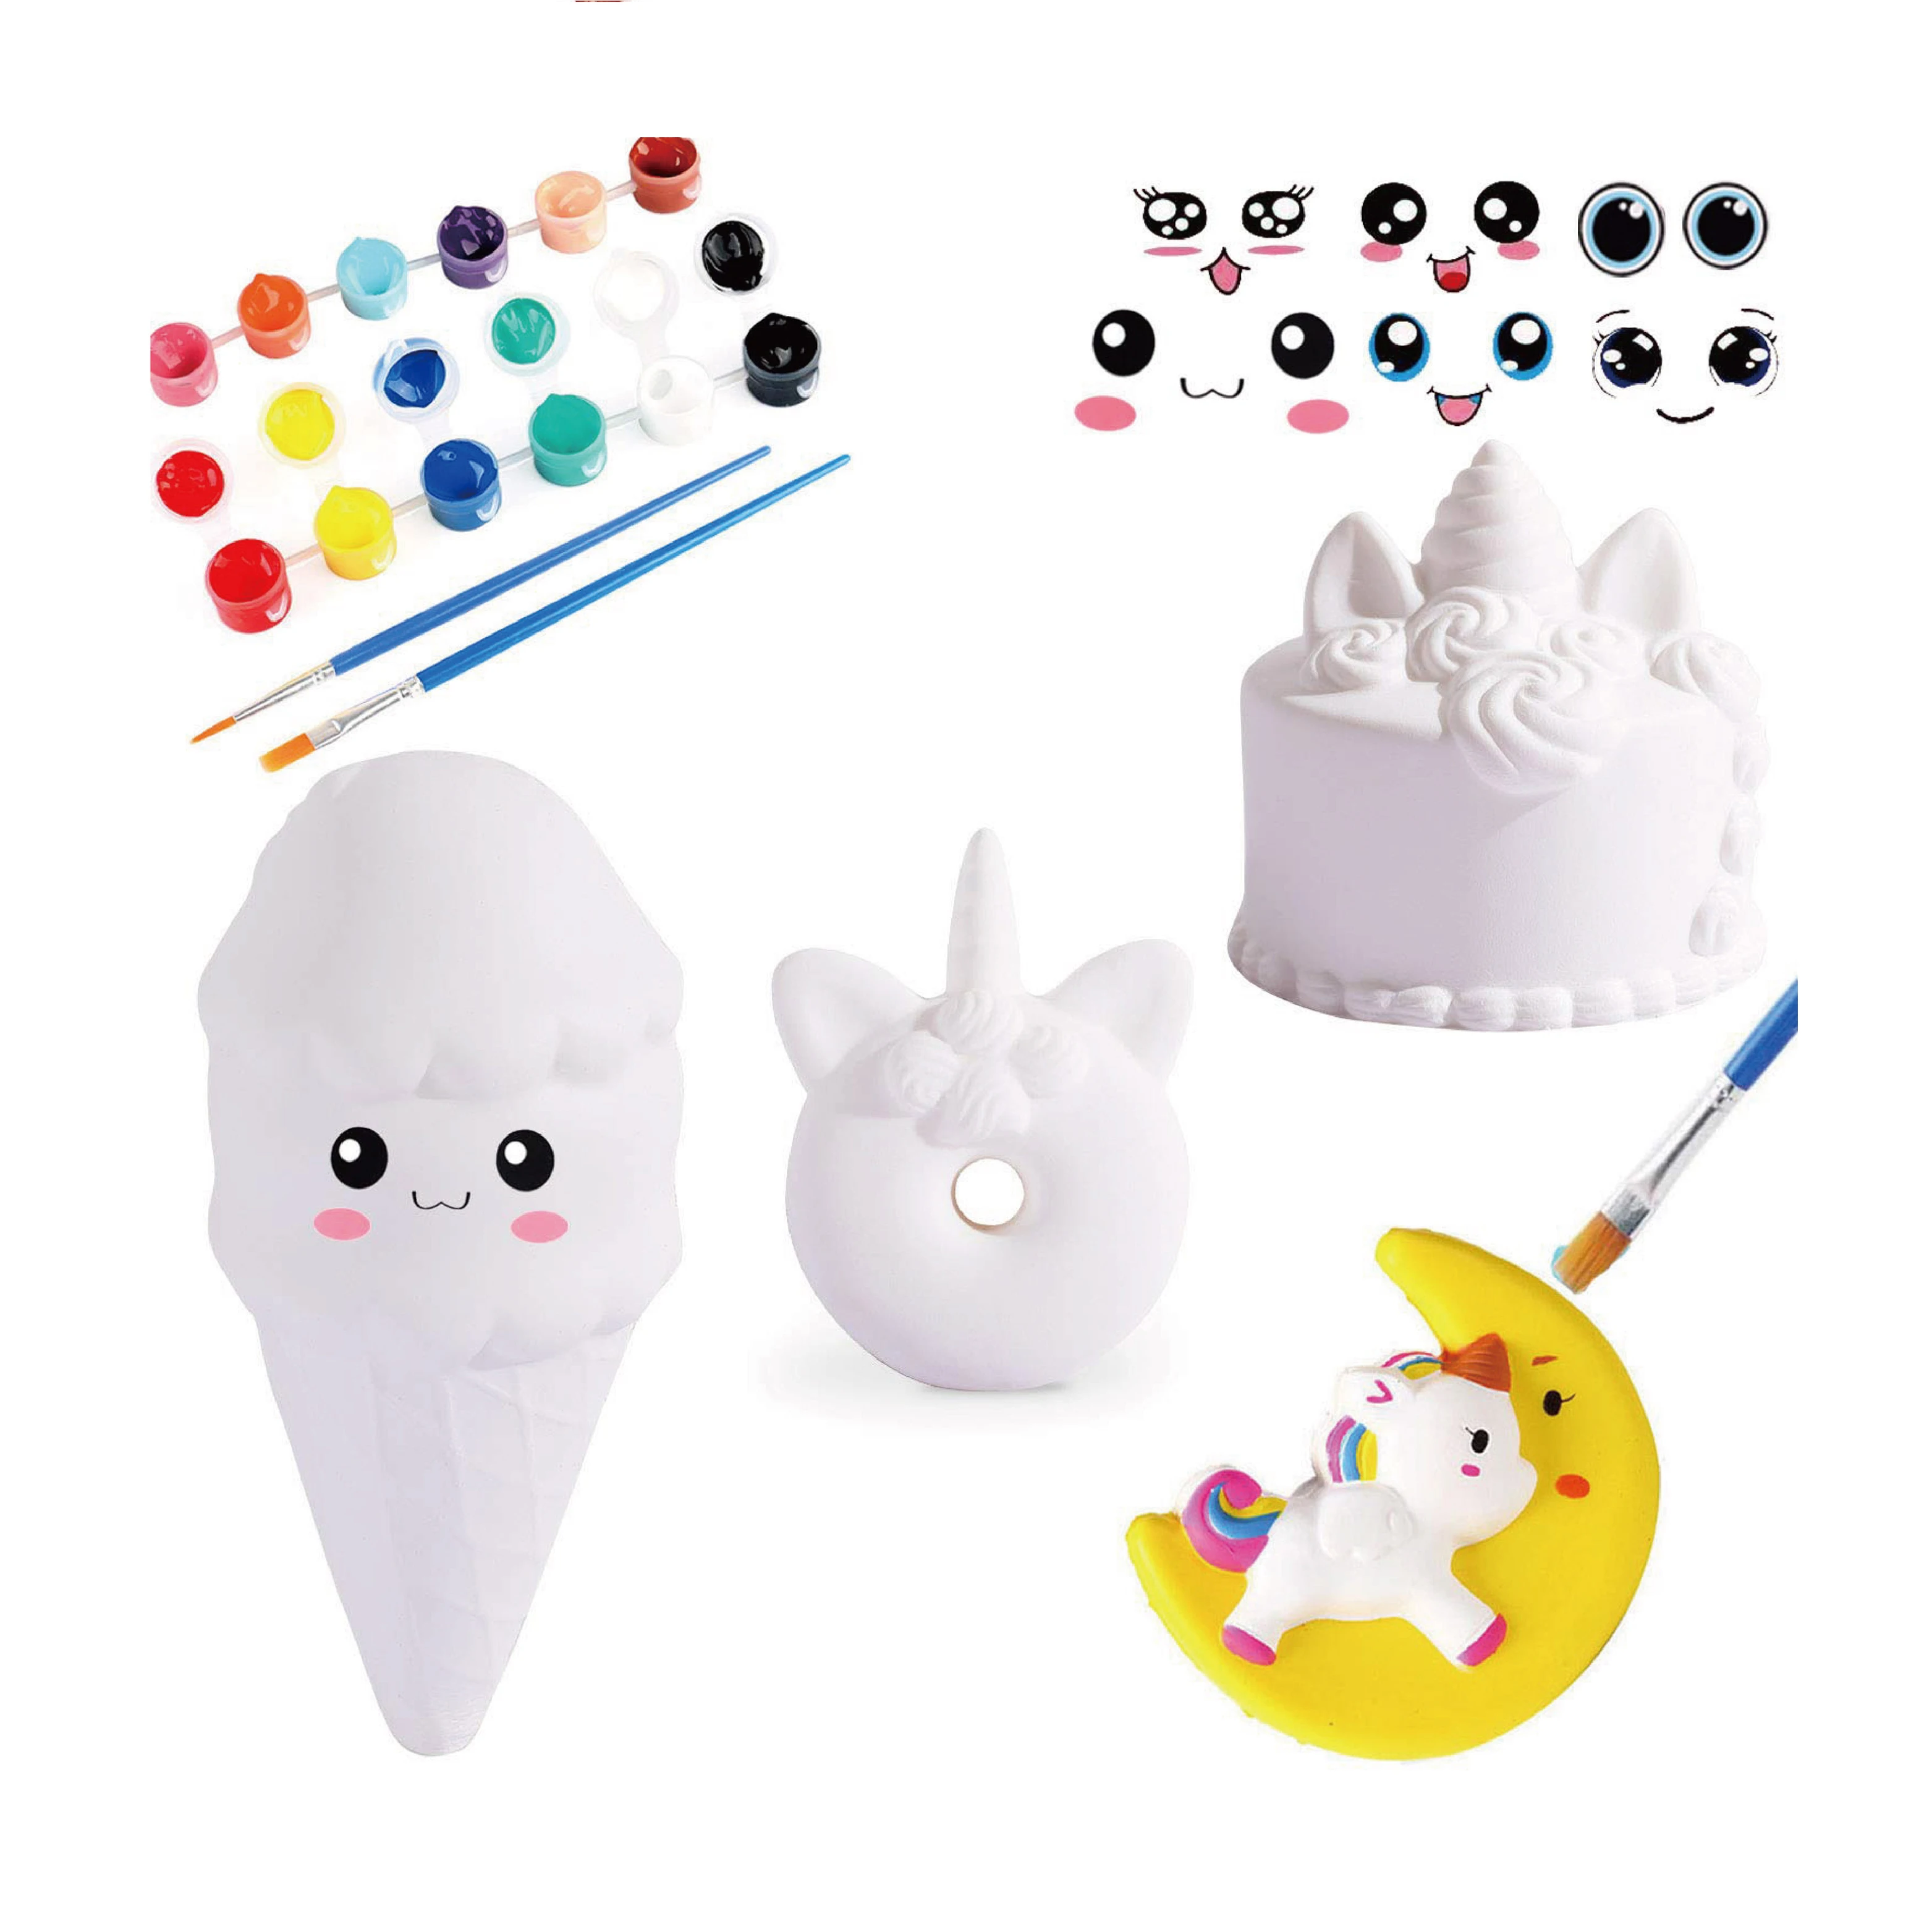 DIY Dessert Paint Your Own Squishies Kit! Arts and Crafts for Girls